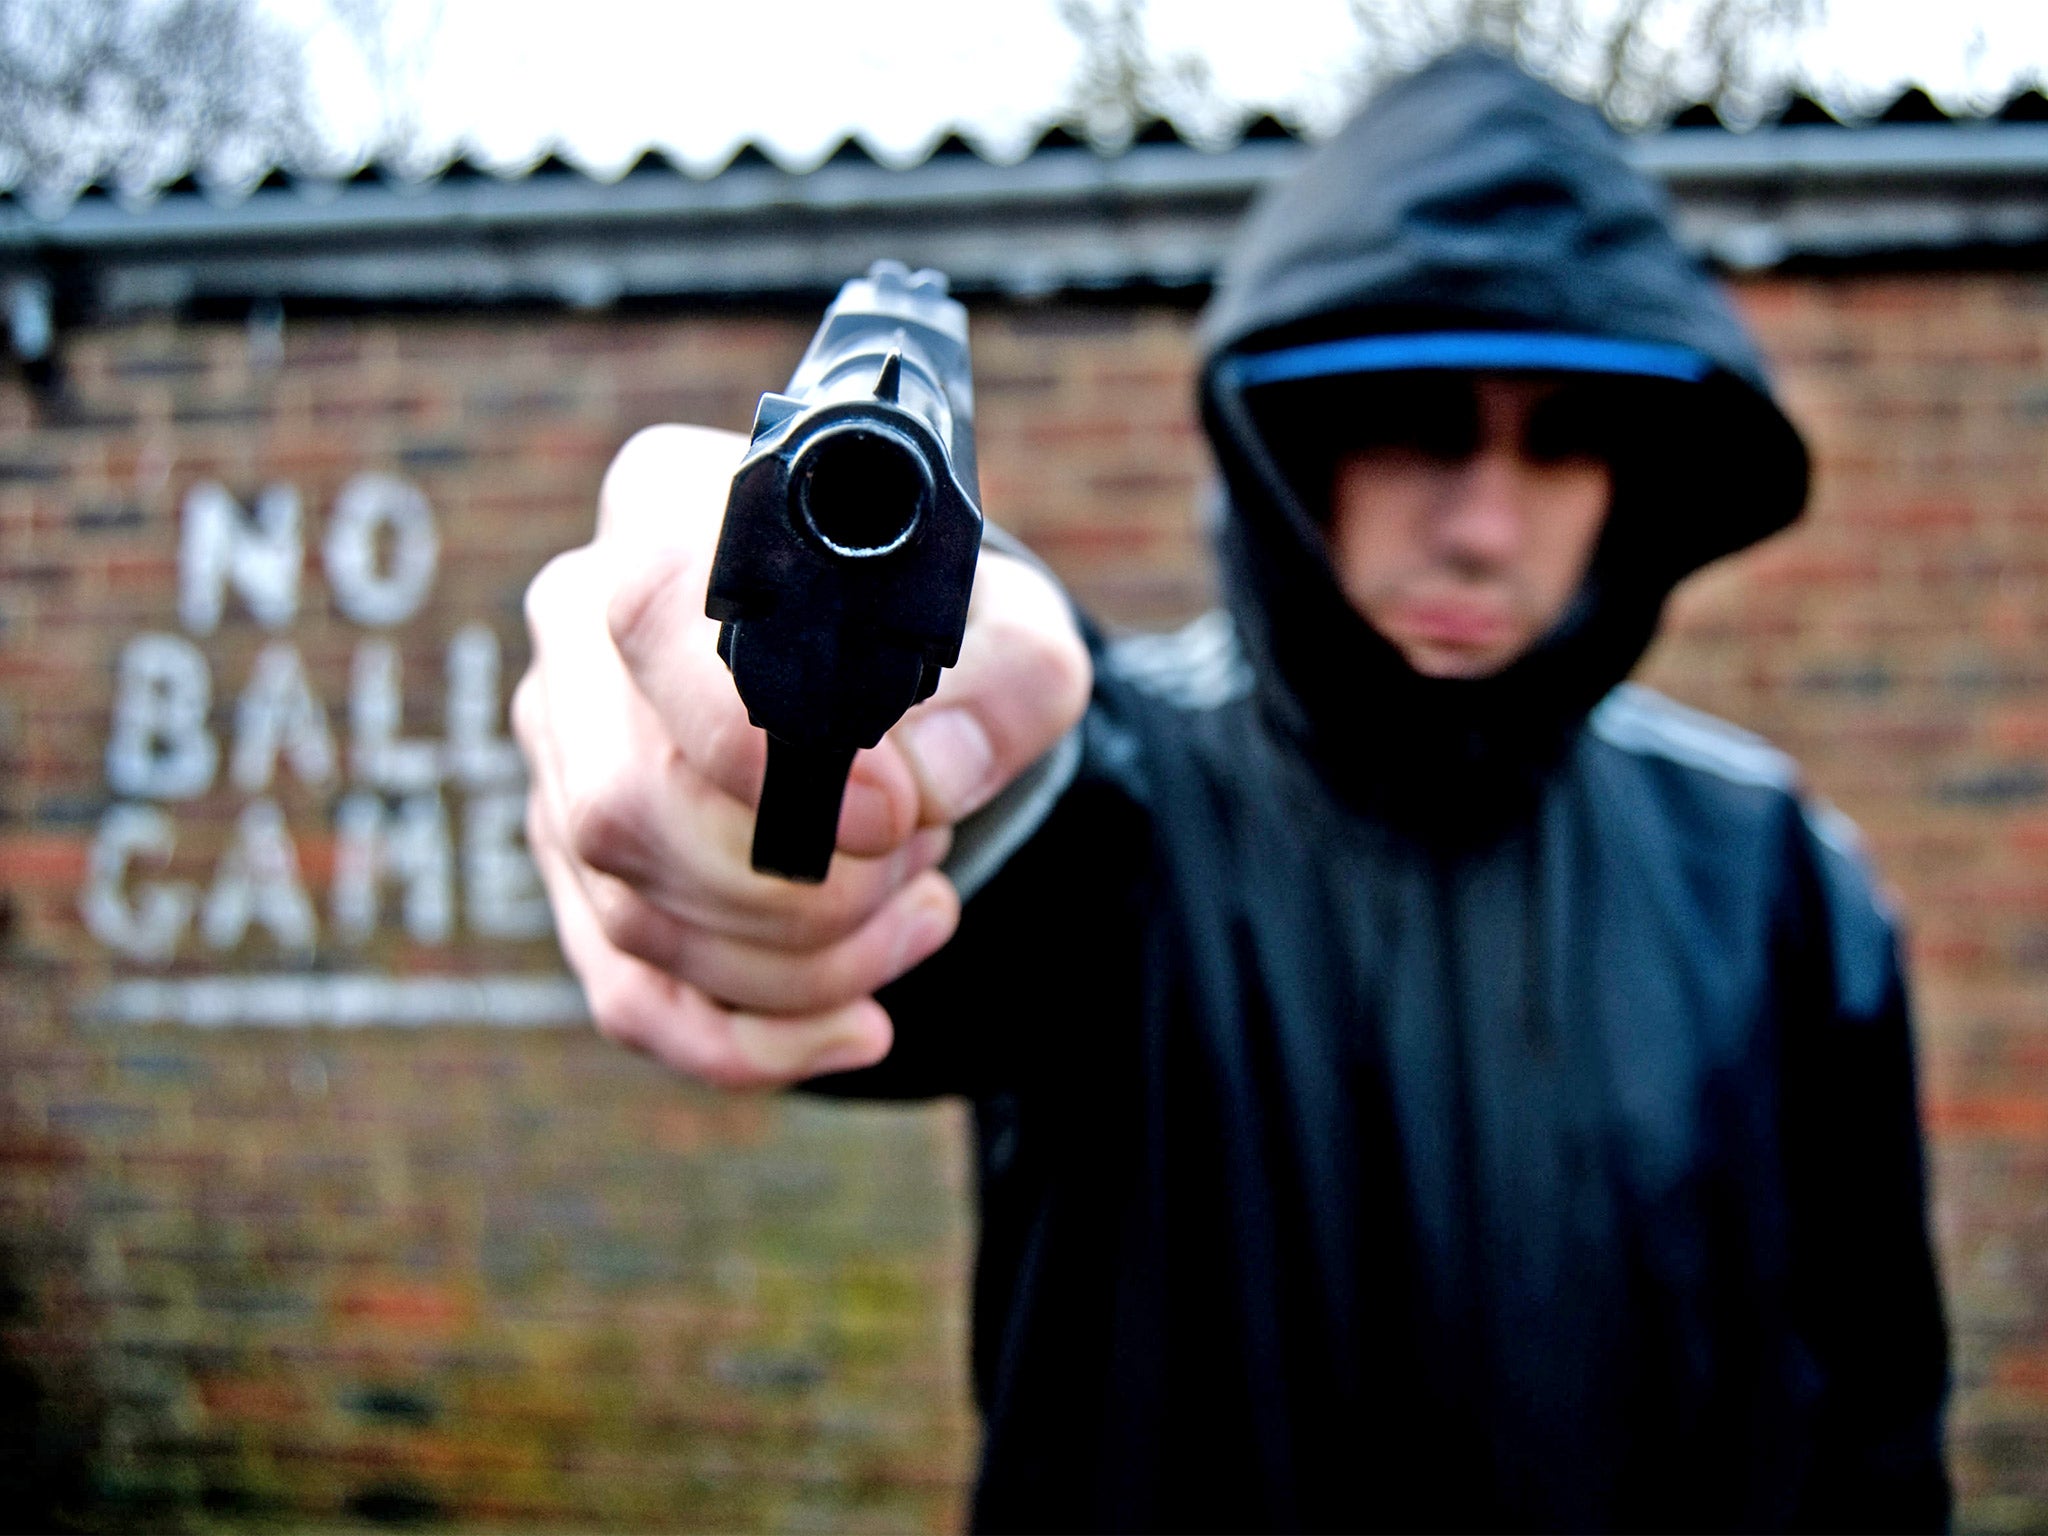 Police in England and Wales recorded 5,911 firearms offences in 2011/12